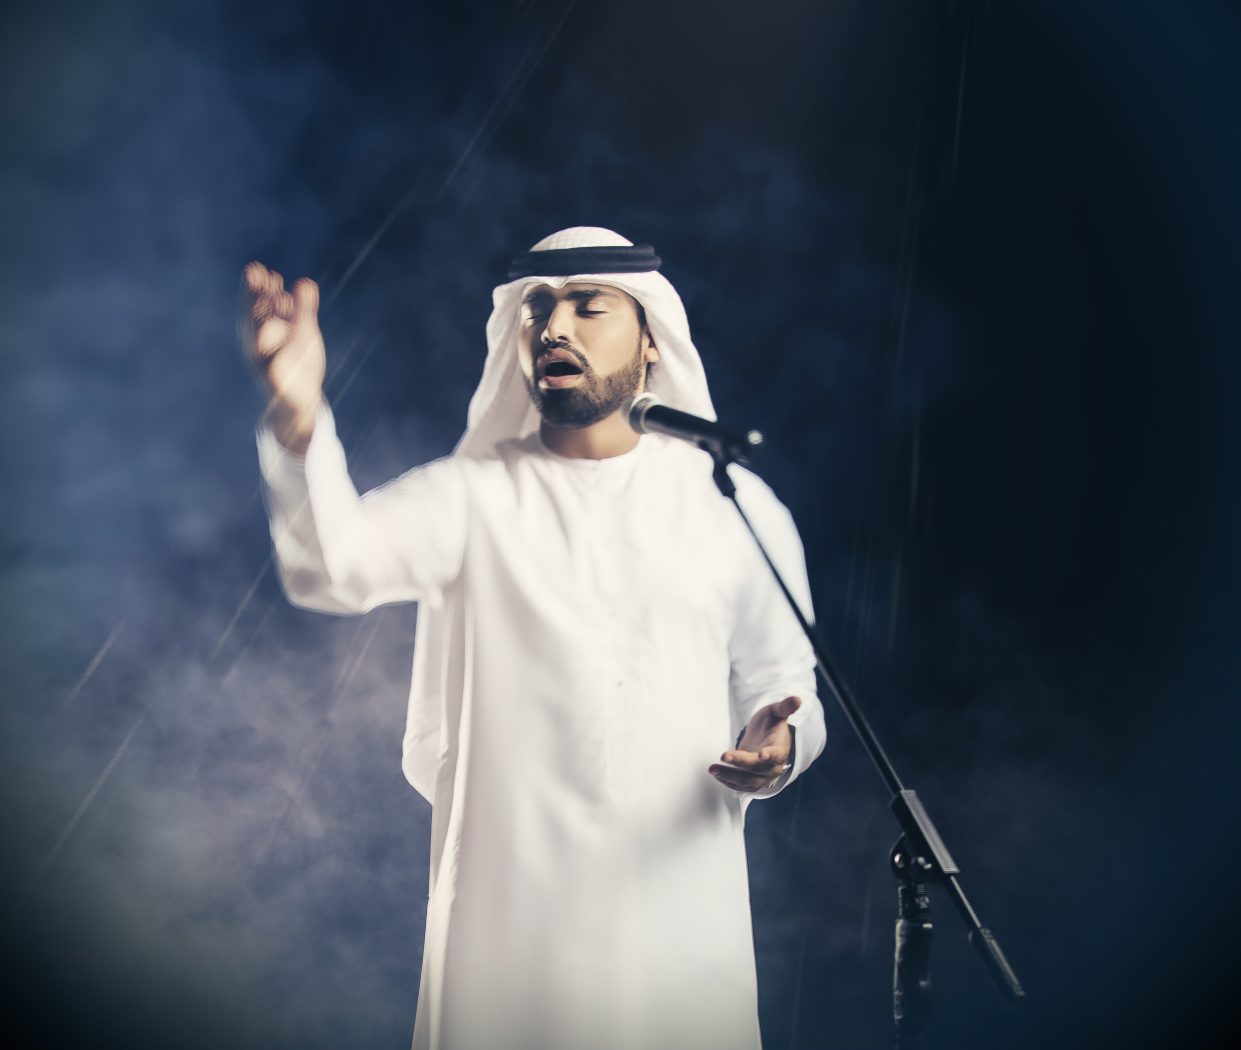 Singer Ahmed Al Hosani is ready to take over the world!